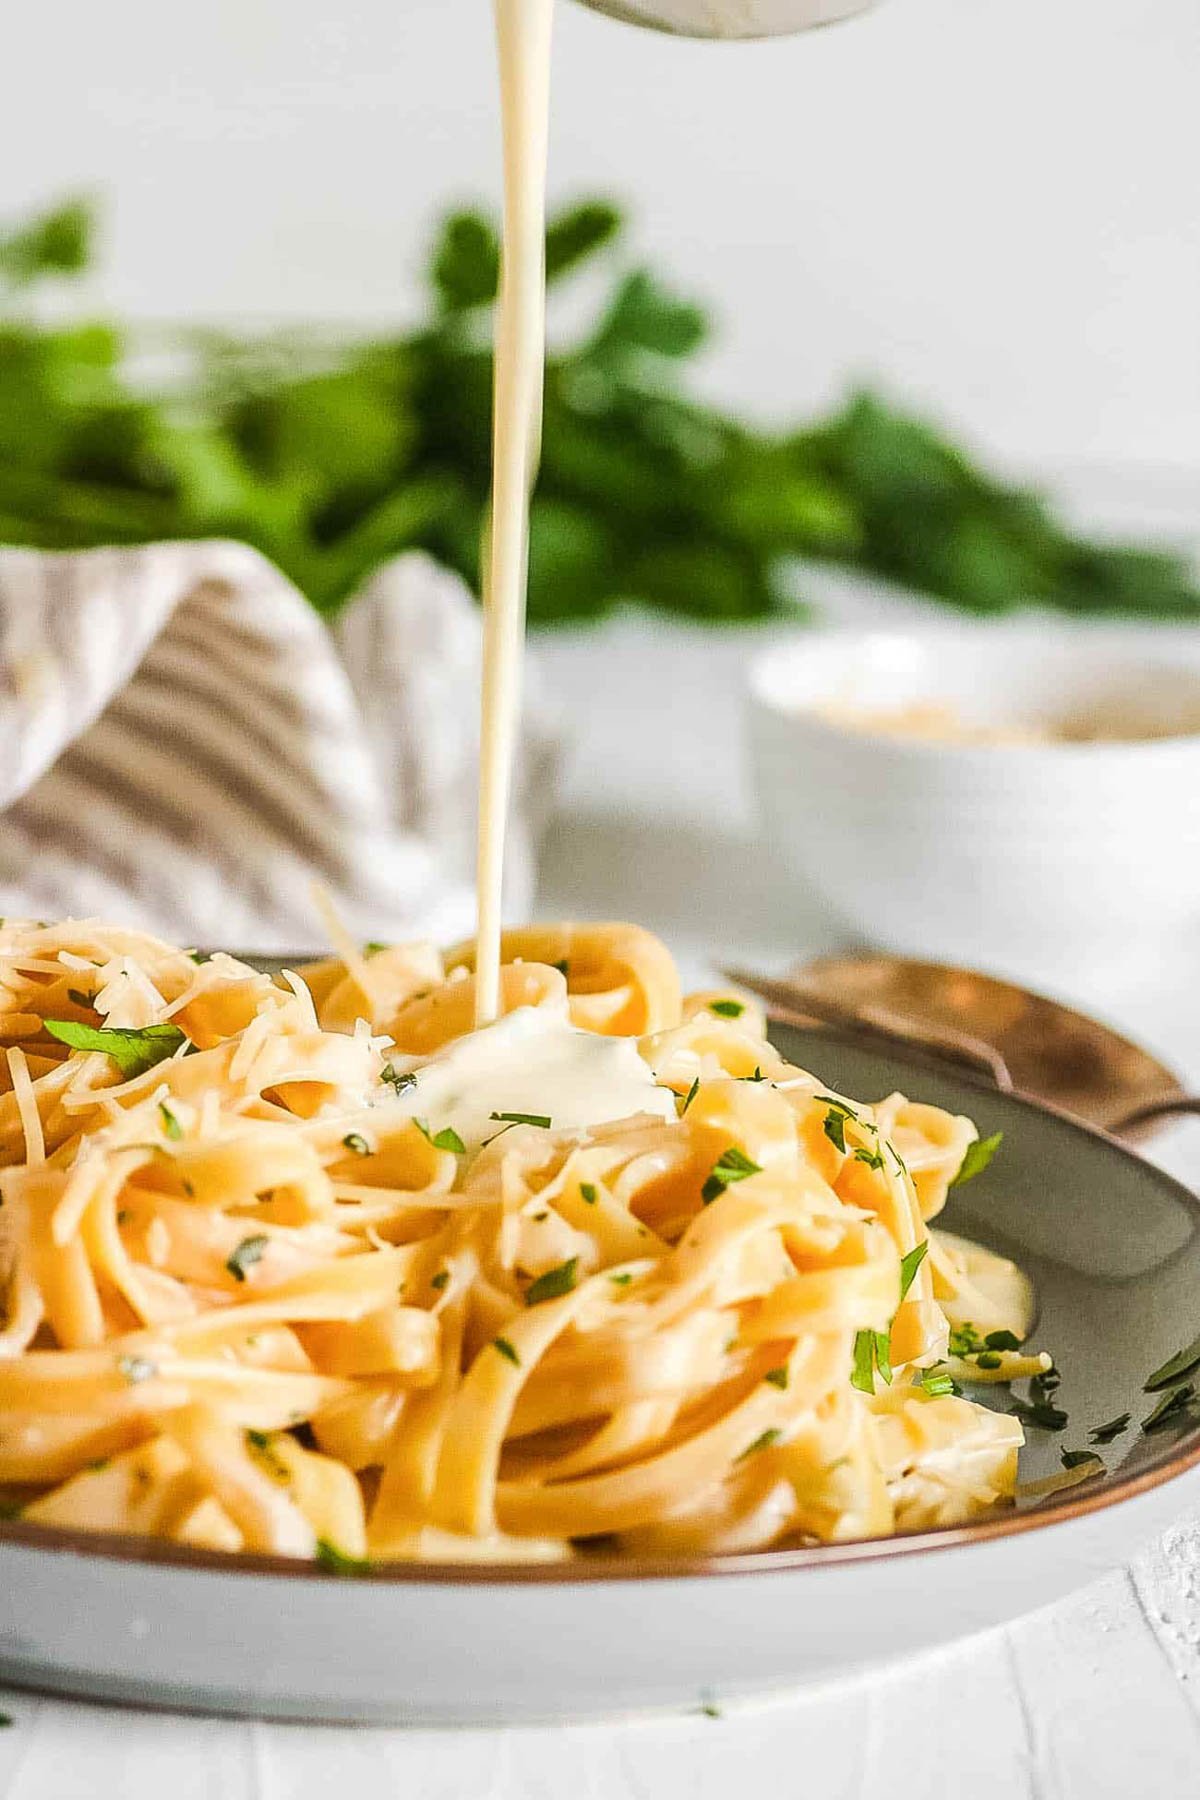 Alfredo sauce without heavy cream poured over pasta on a plate.